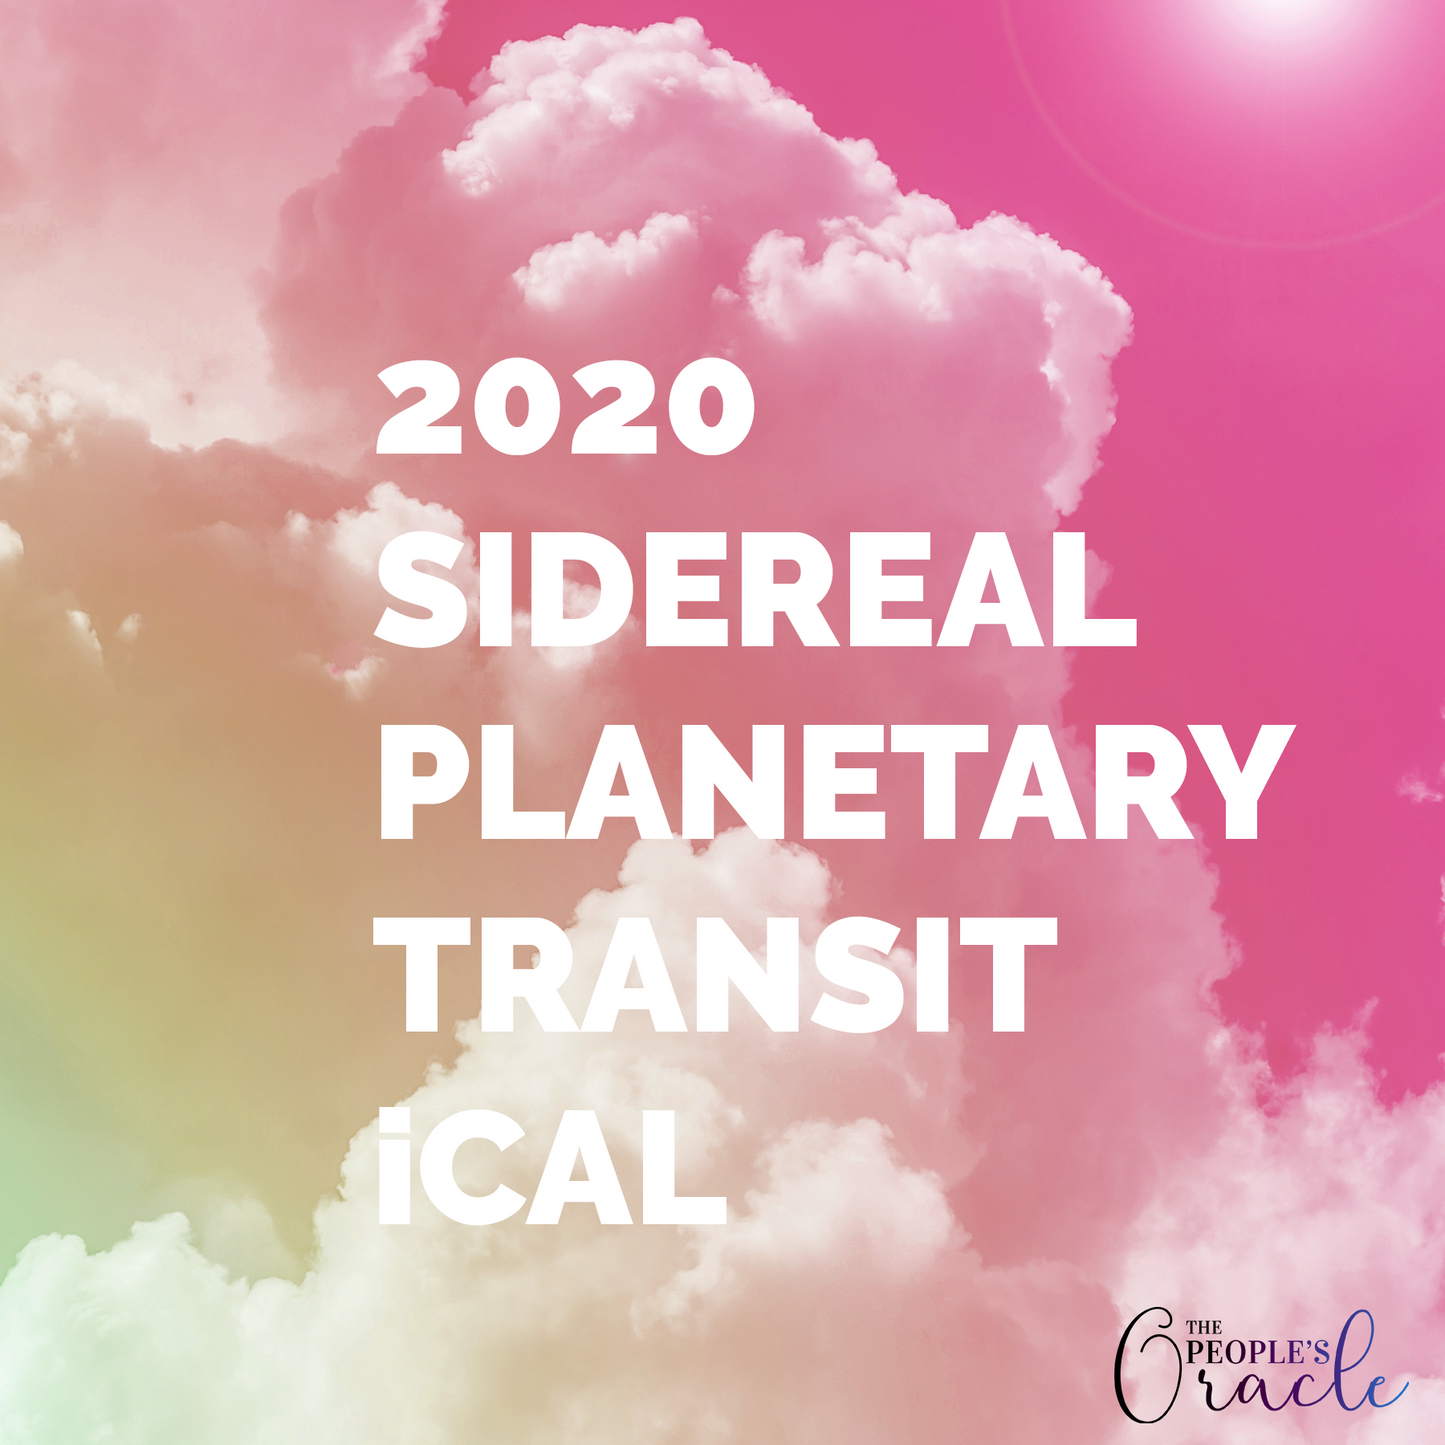 2020 Sidereal Planetary Transits iCal